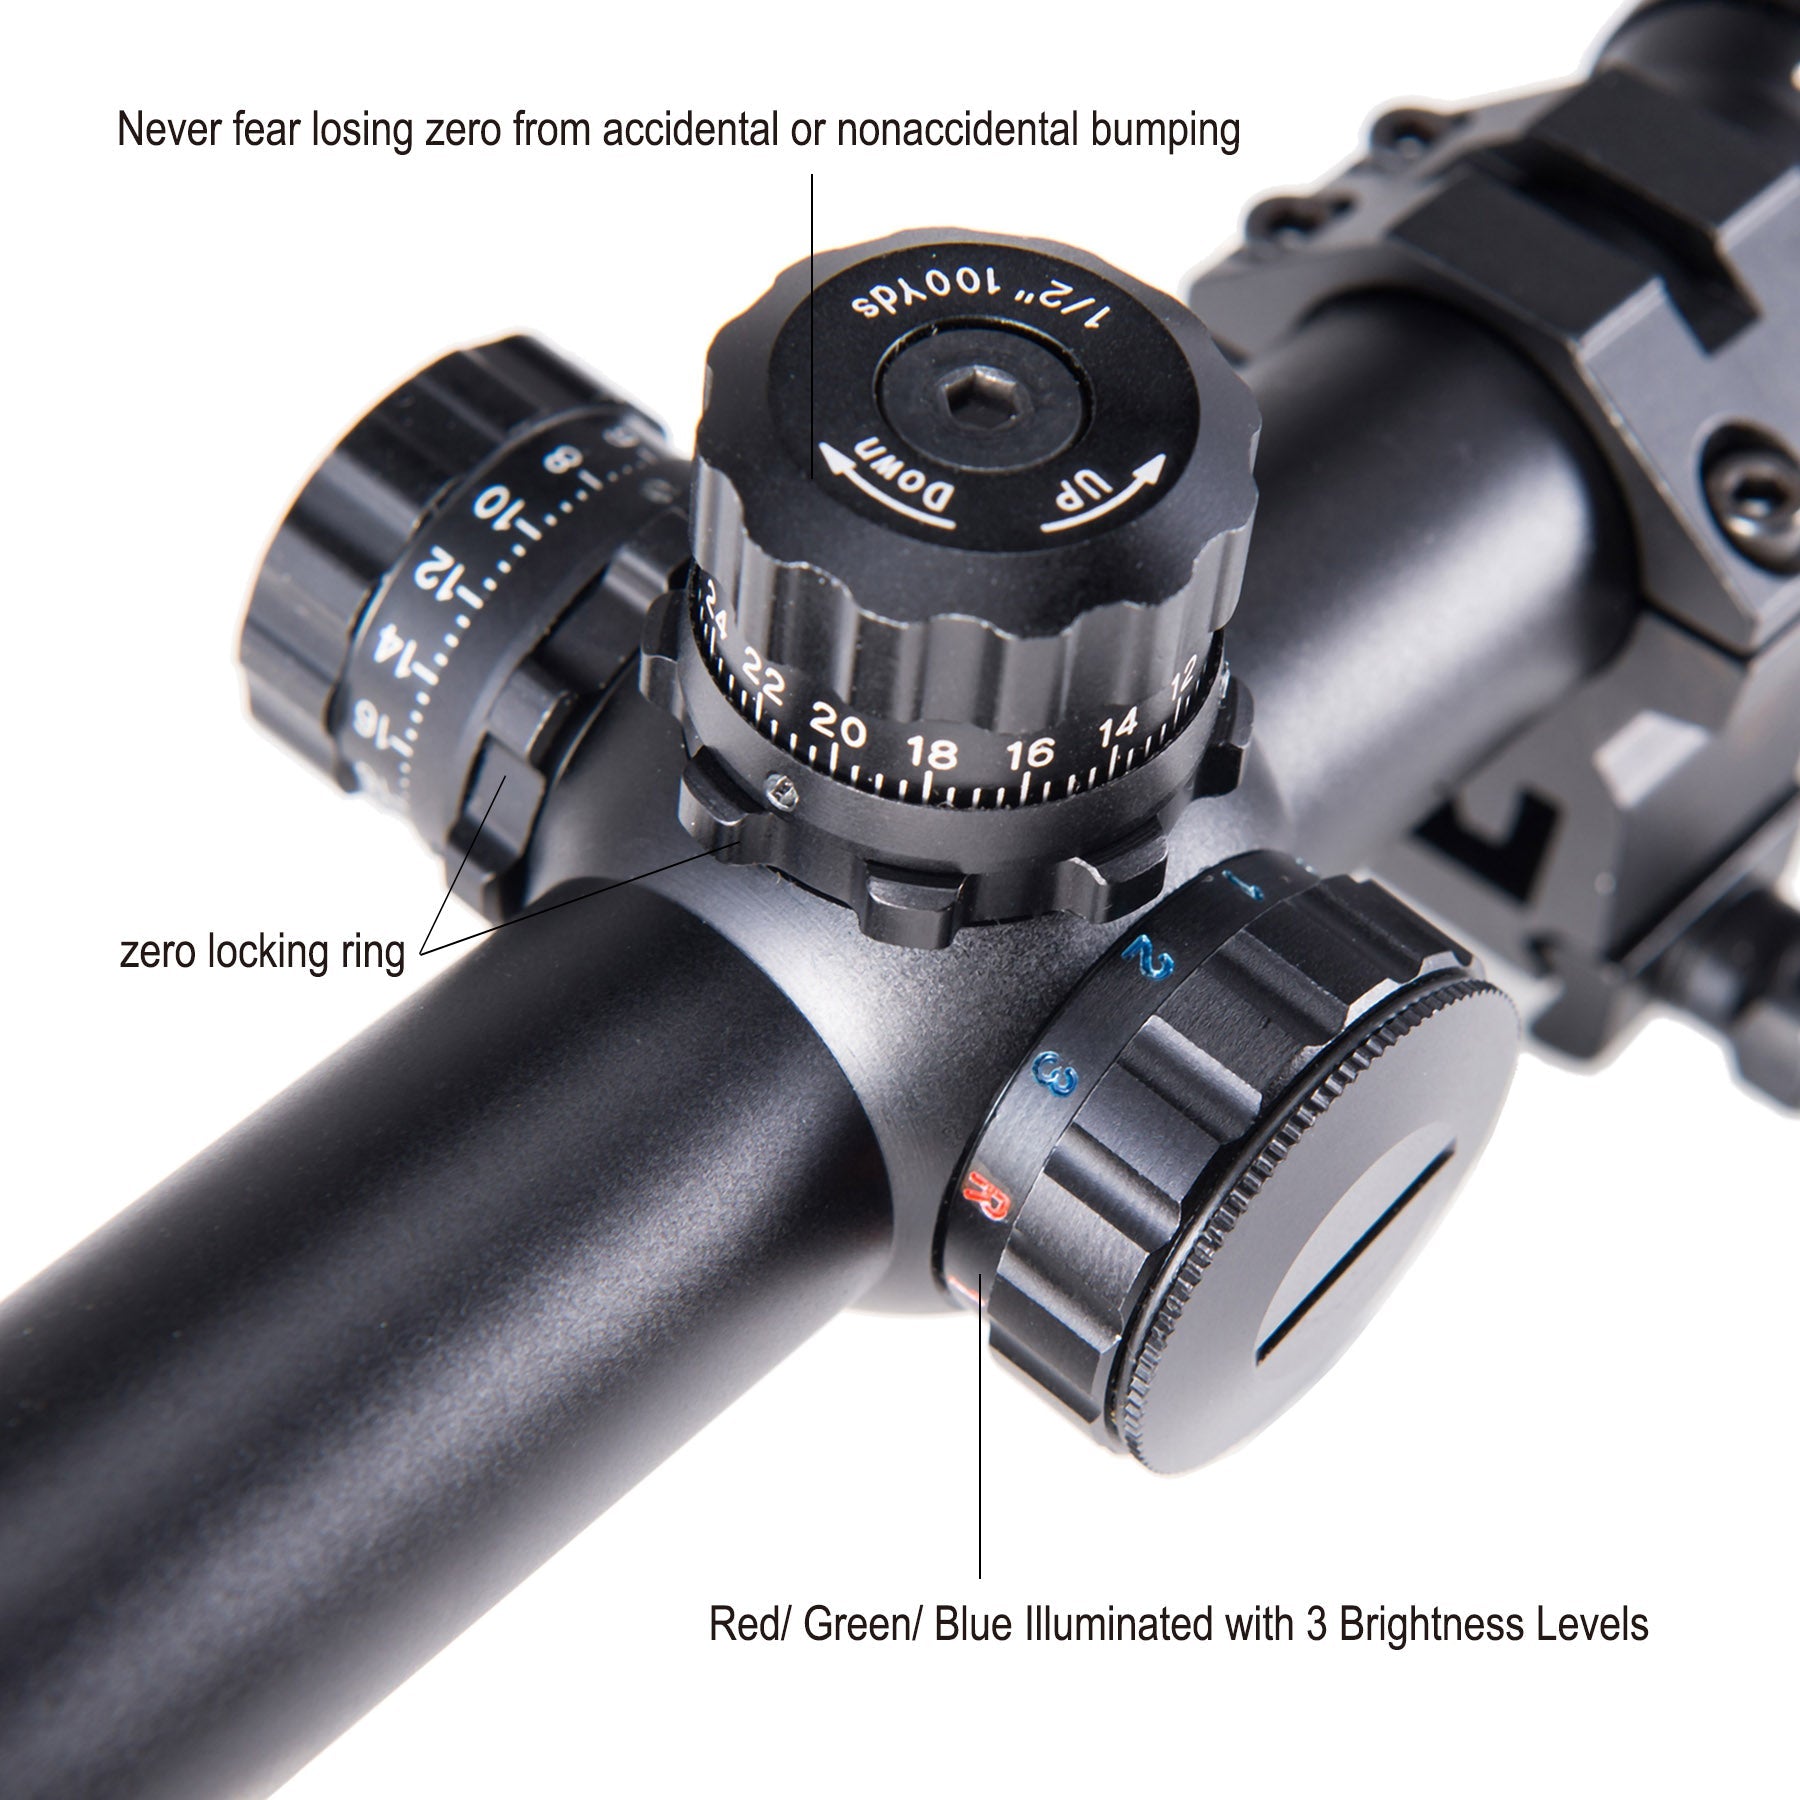 【BUY 1 GET 1 FREE Gift】6-24x50 AO illuminated mil dot riflescope with sunshade tube, flip-up cap and ring mount high-profile picatinny rings